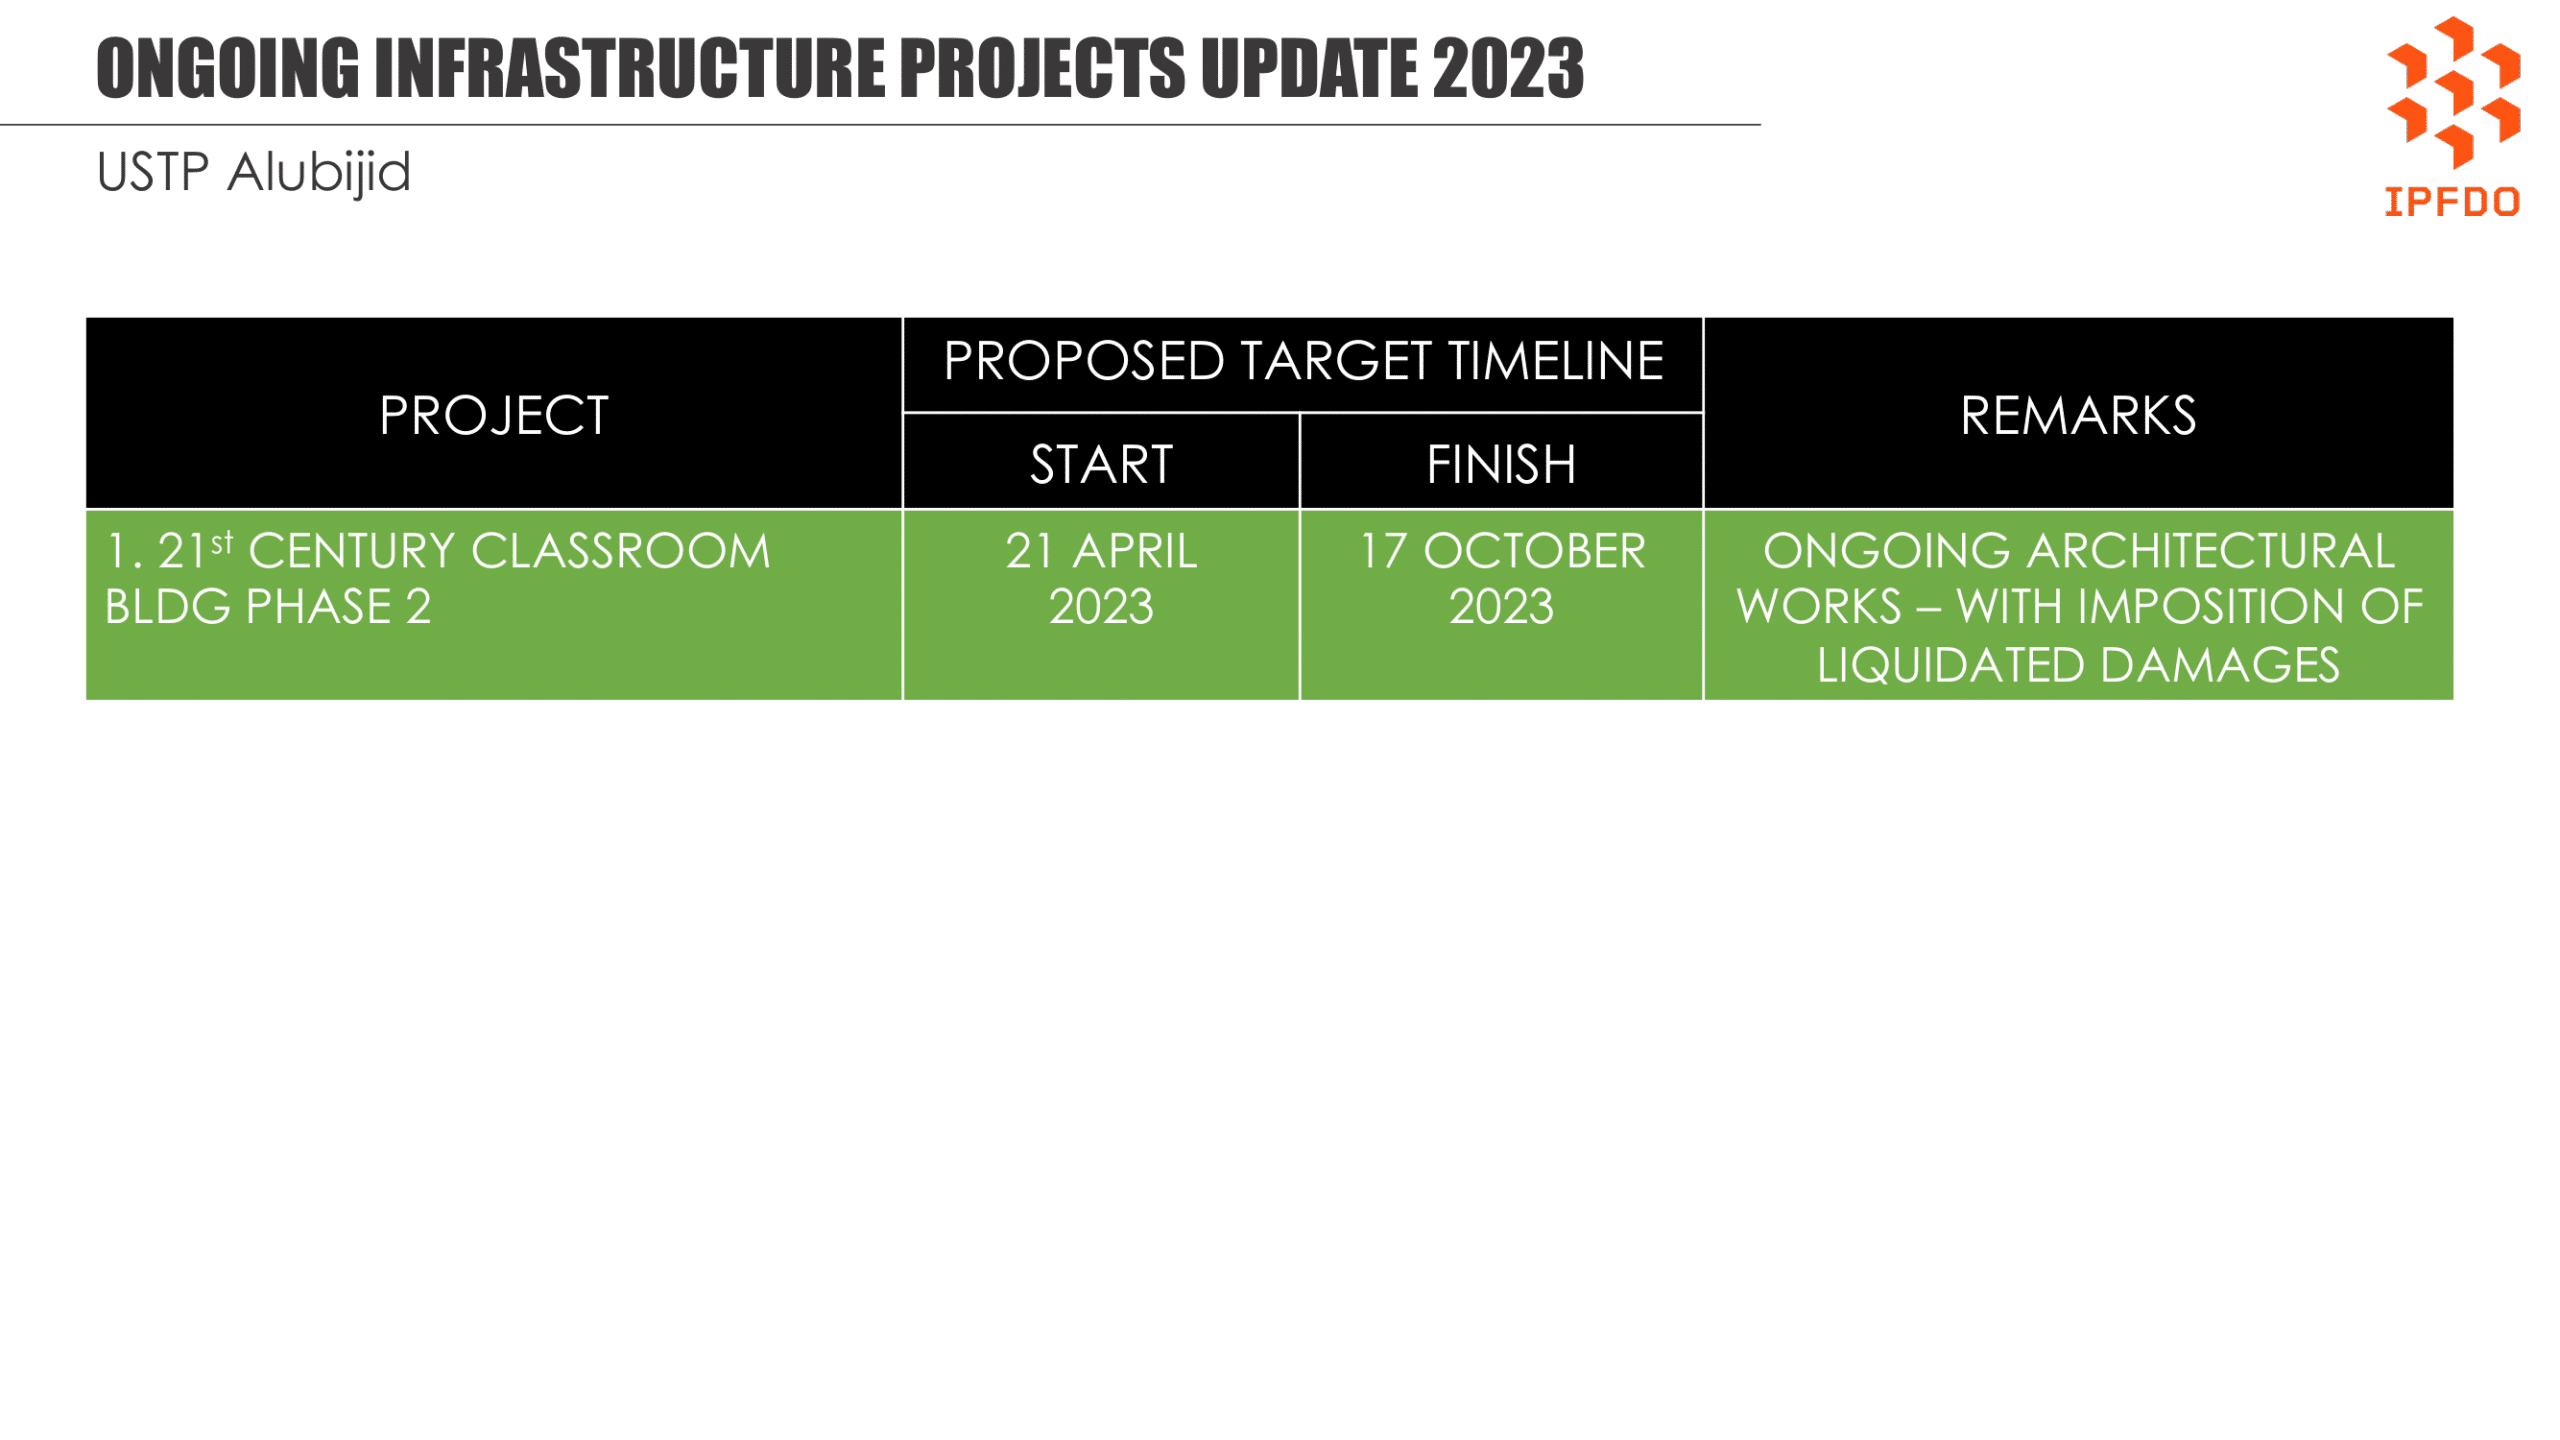 Updates on New Infrastructure 2022 Projects - USTP Alubijid